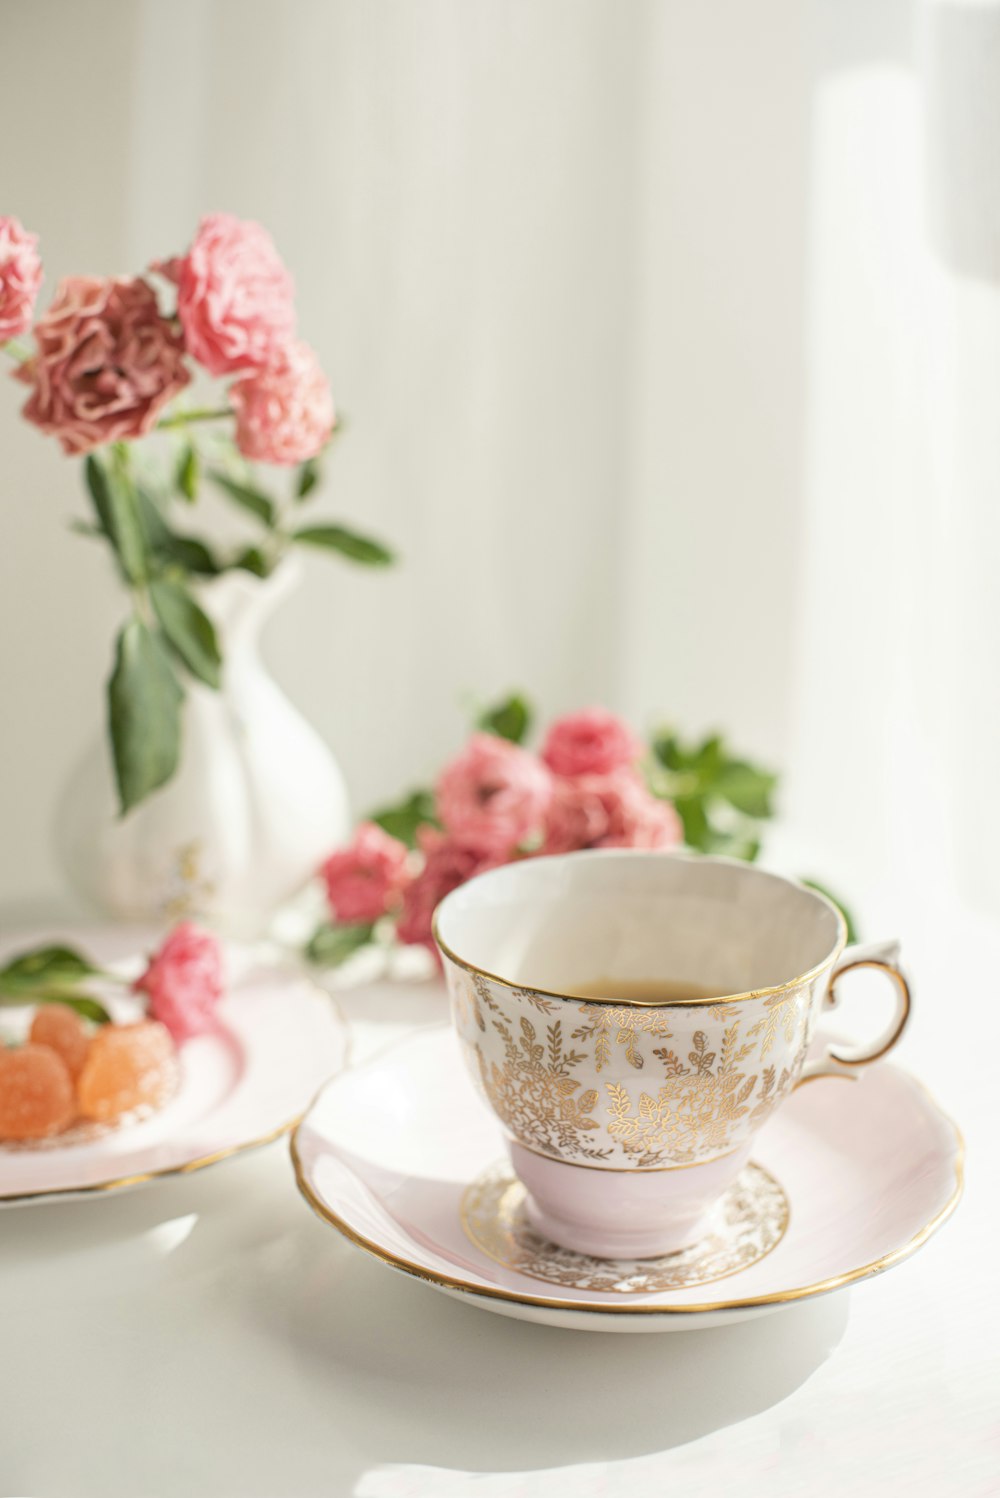 white and pink floral ceramic teacup on saucer